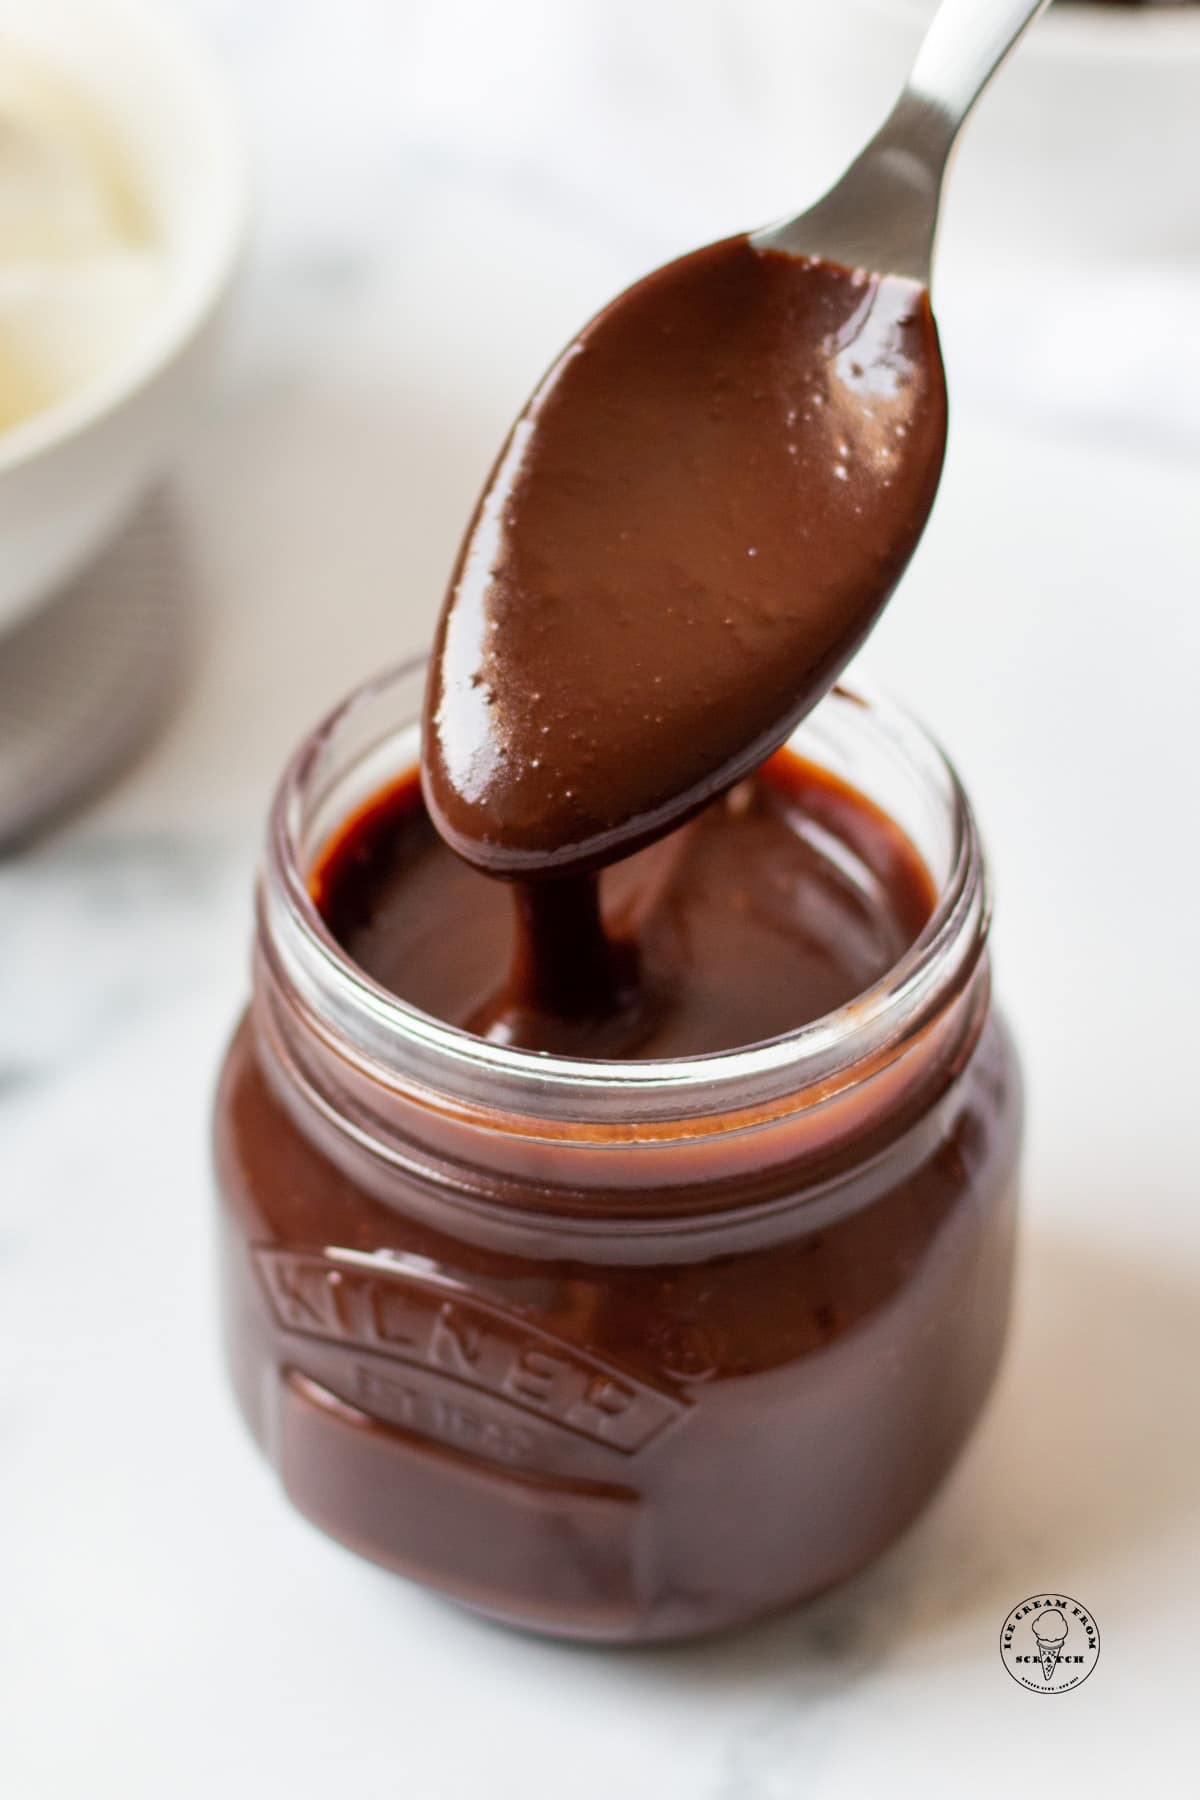 a small glass jar filled with homemade hot fudge. A spoon is lifting some out and the sauce is drizzling back into the jar.